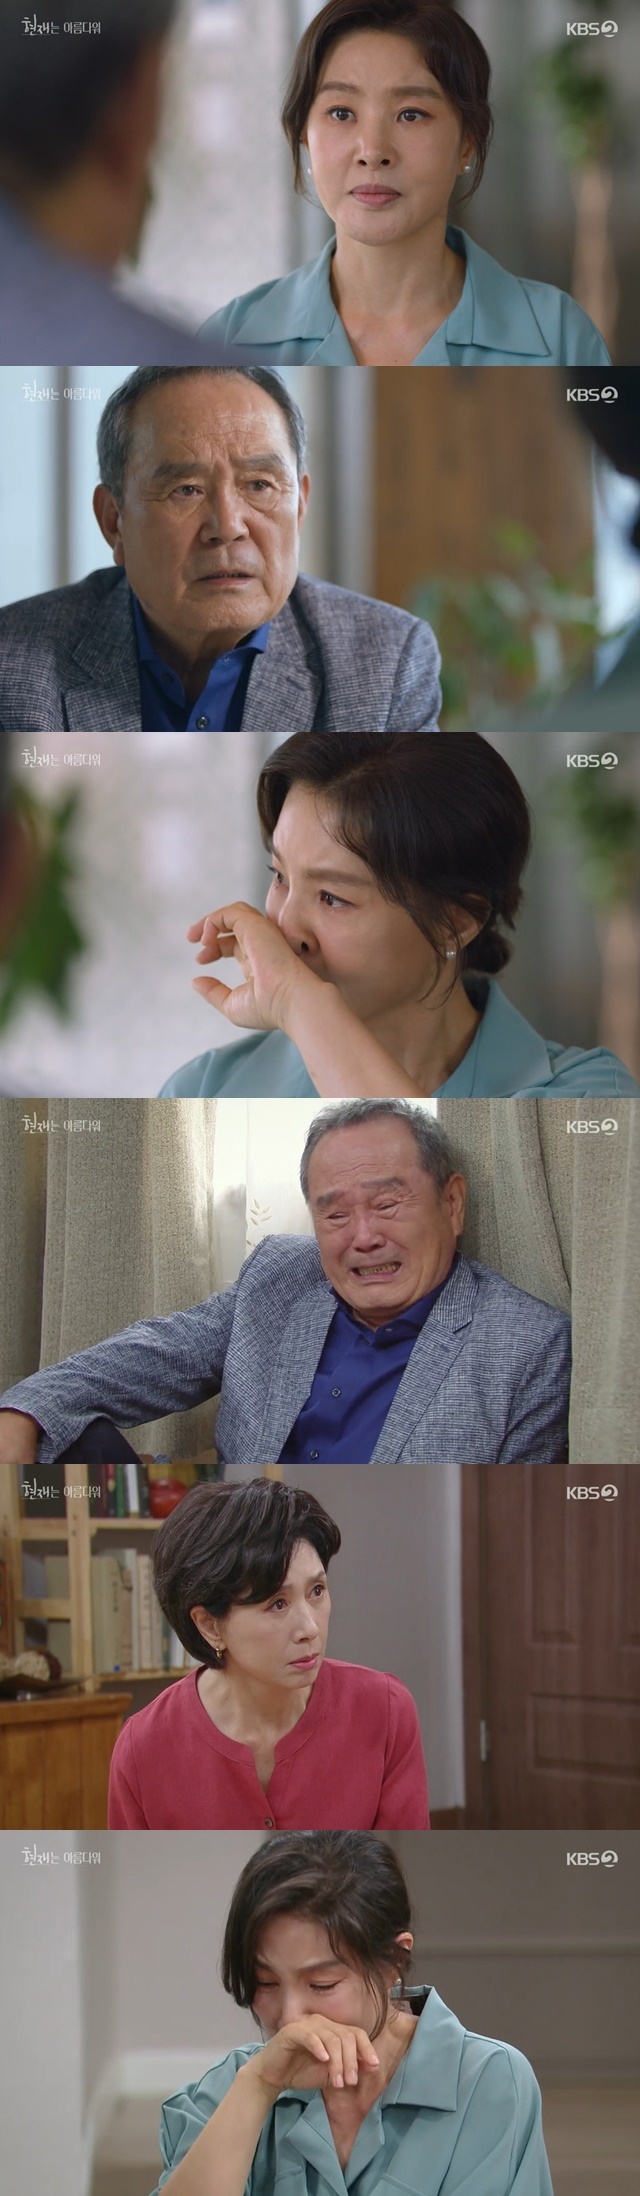 It has been revealed why Park In-Hwan has left her daughter Park Ji-Young to the mystery school in the past.At the 37th KBS 2TV weekend drama Its Beautiful Now (playplayplay by Ha Myung-hee/director Kim Sung-geun), which was broadcast on August 6, Lee kyung-cheol (Park In-Hwan) visited her daughter Jin Soo-jeong (Park Ji-Young) to explain her past history.Lee kyung-cheol Jin Soo-jeong was reunited, and Jin Soo-jeong said that the preliminary son Lee kyung-cheol was my father.I did not know that, and I imagined it. Lee kyung-cheol caught him, but Jin Soo-jeong shook off and left the bathroom alone.Lee kyung-cheol repented of not holding her daughter Jin Soo-jeong to the end.Lee kyung-cheol confided to his adopted son Lee Min-ho (Park Sang-won) that he wanted to do anything he could not do as a parent until now. Lee Min-ho called his prospective son and stepbrother, Jin Soo-jeong, to ask for a meeting.Lee Min-ho said, It seemed like living with my father and living with my fathers lost daughter and three people. Is it angry that my father lived happily?Yes, Im angry, Im so angry, Im so loving and loved to throw away my own children and adopt another, said Lee Min-ho, an angry man.I left it to the mystery school for a while, but Jin Soo-jeong did not listen to Leave it for a while? I left it for a while. Lee kyung-cheol asked Jin Soo-jeong to meet him, saying, Lets meet once, I will hear you if you hit me and you swear.Lee kyung-cheol said that he had lost his wife to cancer and contracted tuberculosis, and that he had left his daughter Jin Soo-jeong to the mystery school.Jin Soo-jeong said, Why did you find me?When asked, Why do you live without shortage? Lee kyung-cheol said, I have never forgotten you after losing you.I also raised my child to adopt Minho because I thought that someone would do it to you if I raised it like my child.I felt relieved that the sky had given me my wish because I thought I had grown up with you, but I didnt have a hard time.Jin Soo-jeong said, If you grow up as a professors daughter, will not your biological parents have abandoned it? I wanted to live with my parents who gave birth even if there is nothing socially to offer.I wanted to know who my parents were even if I fought and lived without them. And Jin Soo-jeong said, If you were poor, sick, and twisted, you would understand, how could you manage your child when you were too hard to manage your life? We met three times.I thought he was a very comfortable person, and he was my father who abandoned me. 